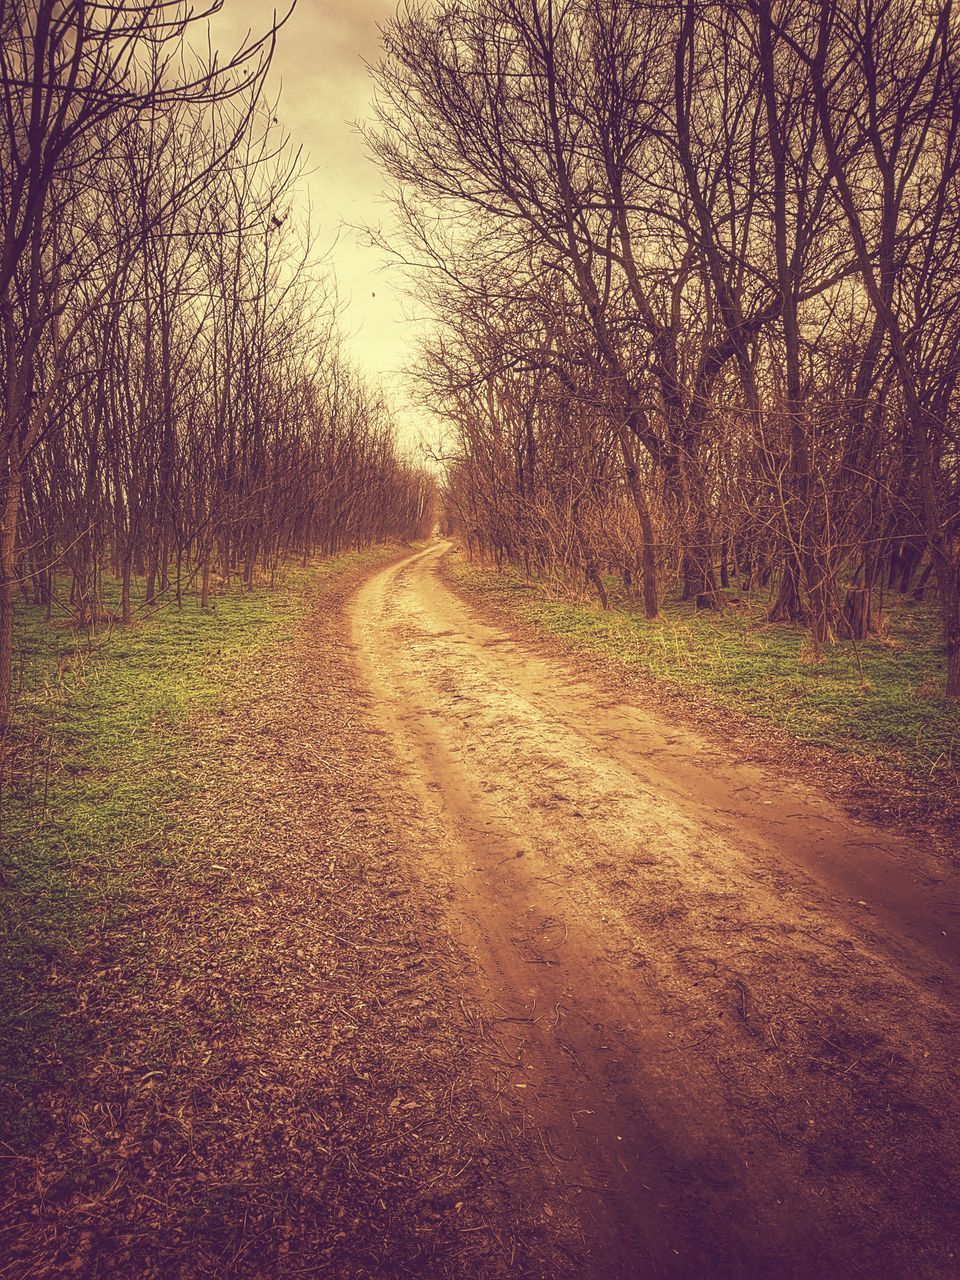 DIRT ROAD ALONG BARE TREES AND PLANTS